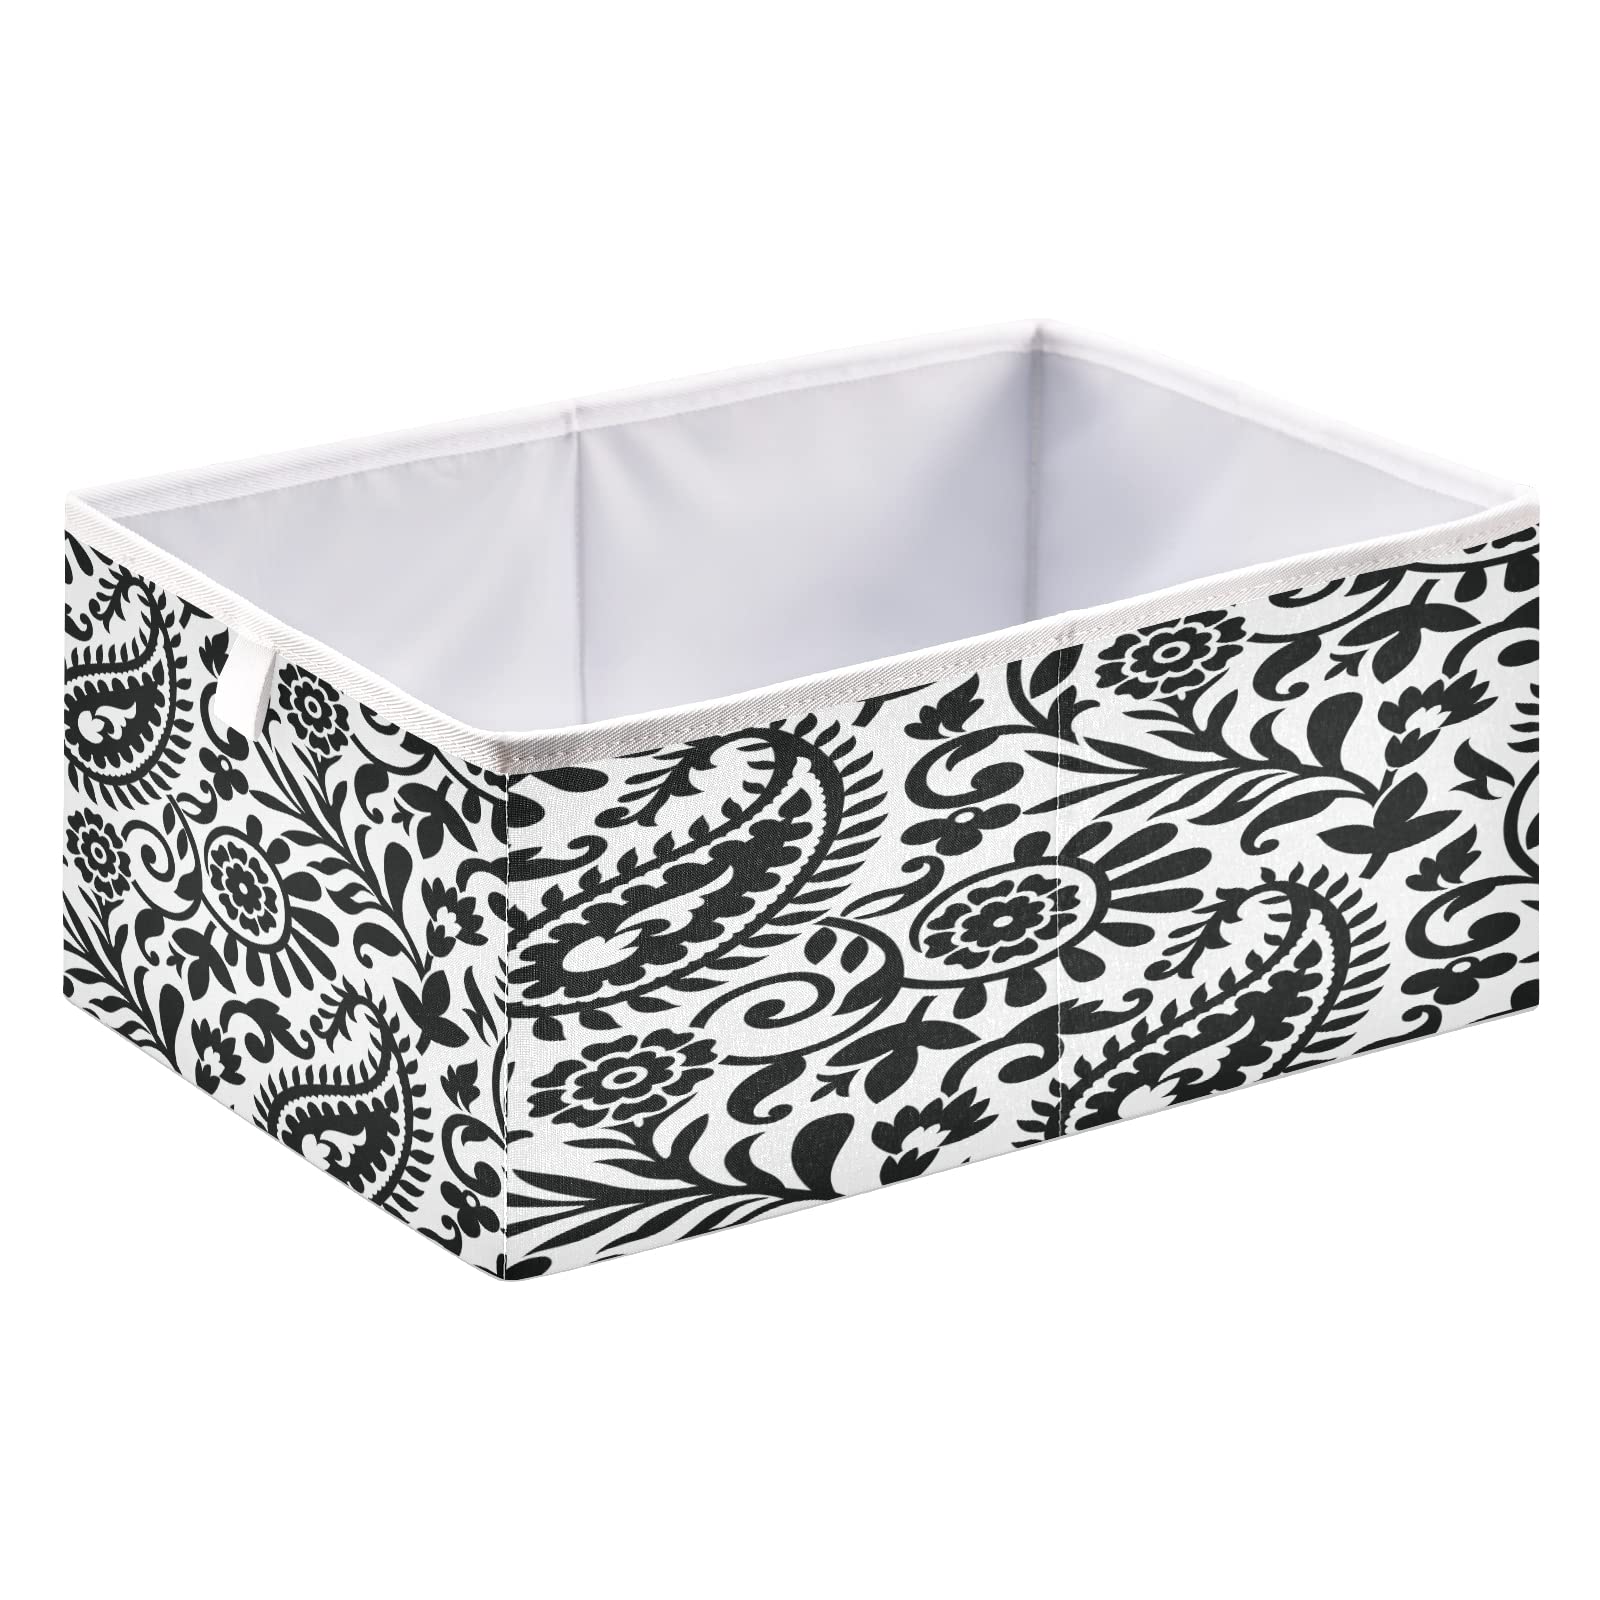 Blueangle Black and White Pattern Rectangle Storage Bin, 15.8 x 10.6 x 7 in, Large Collapsible Organizer Storage Basket for Home Décor（42）